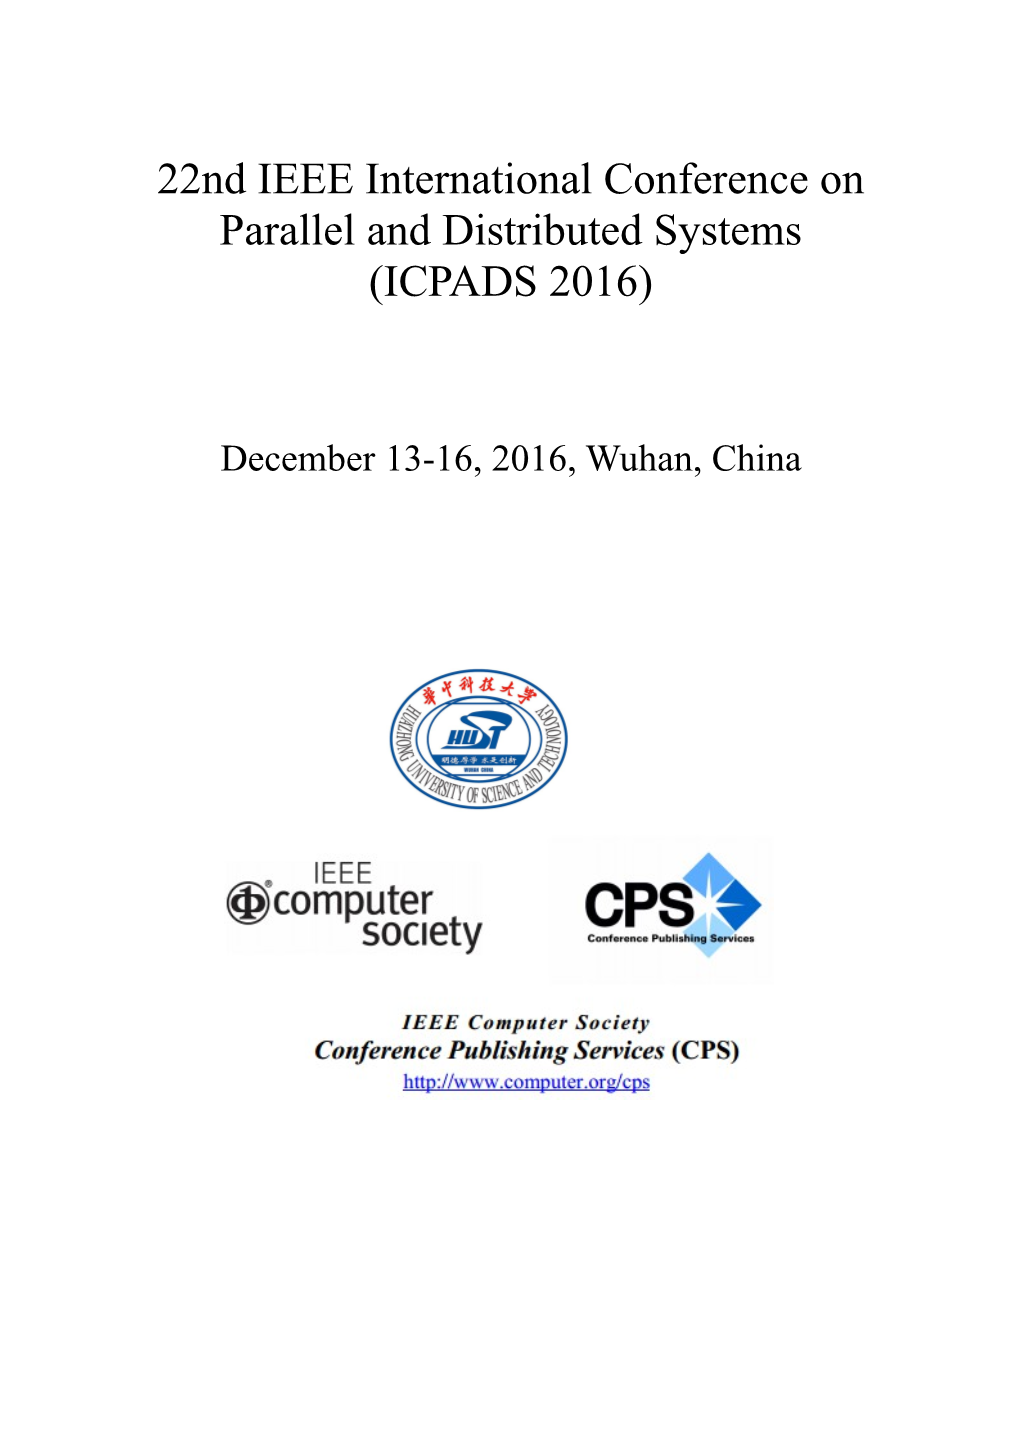 22Nd IEEE International Conference on Parallel and Distributed Systems